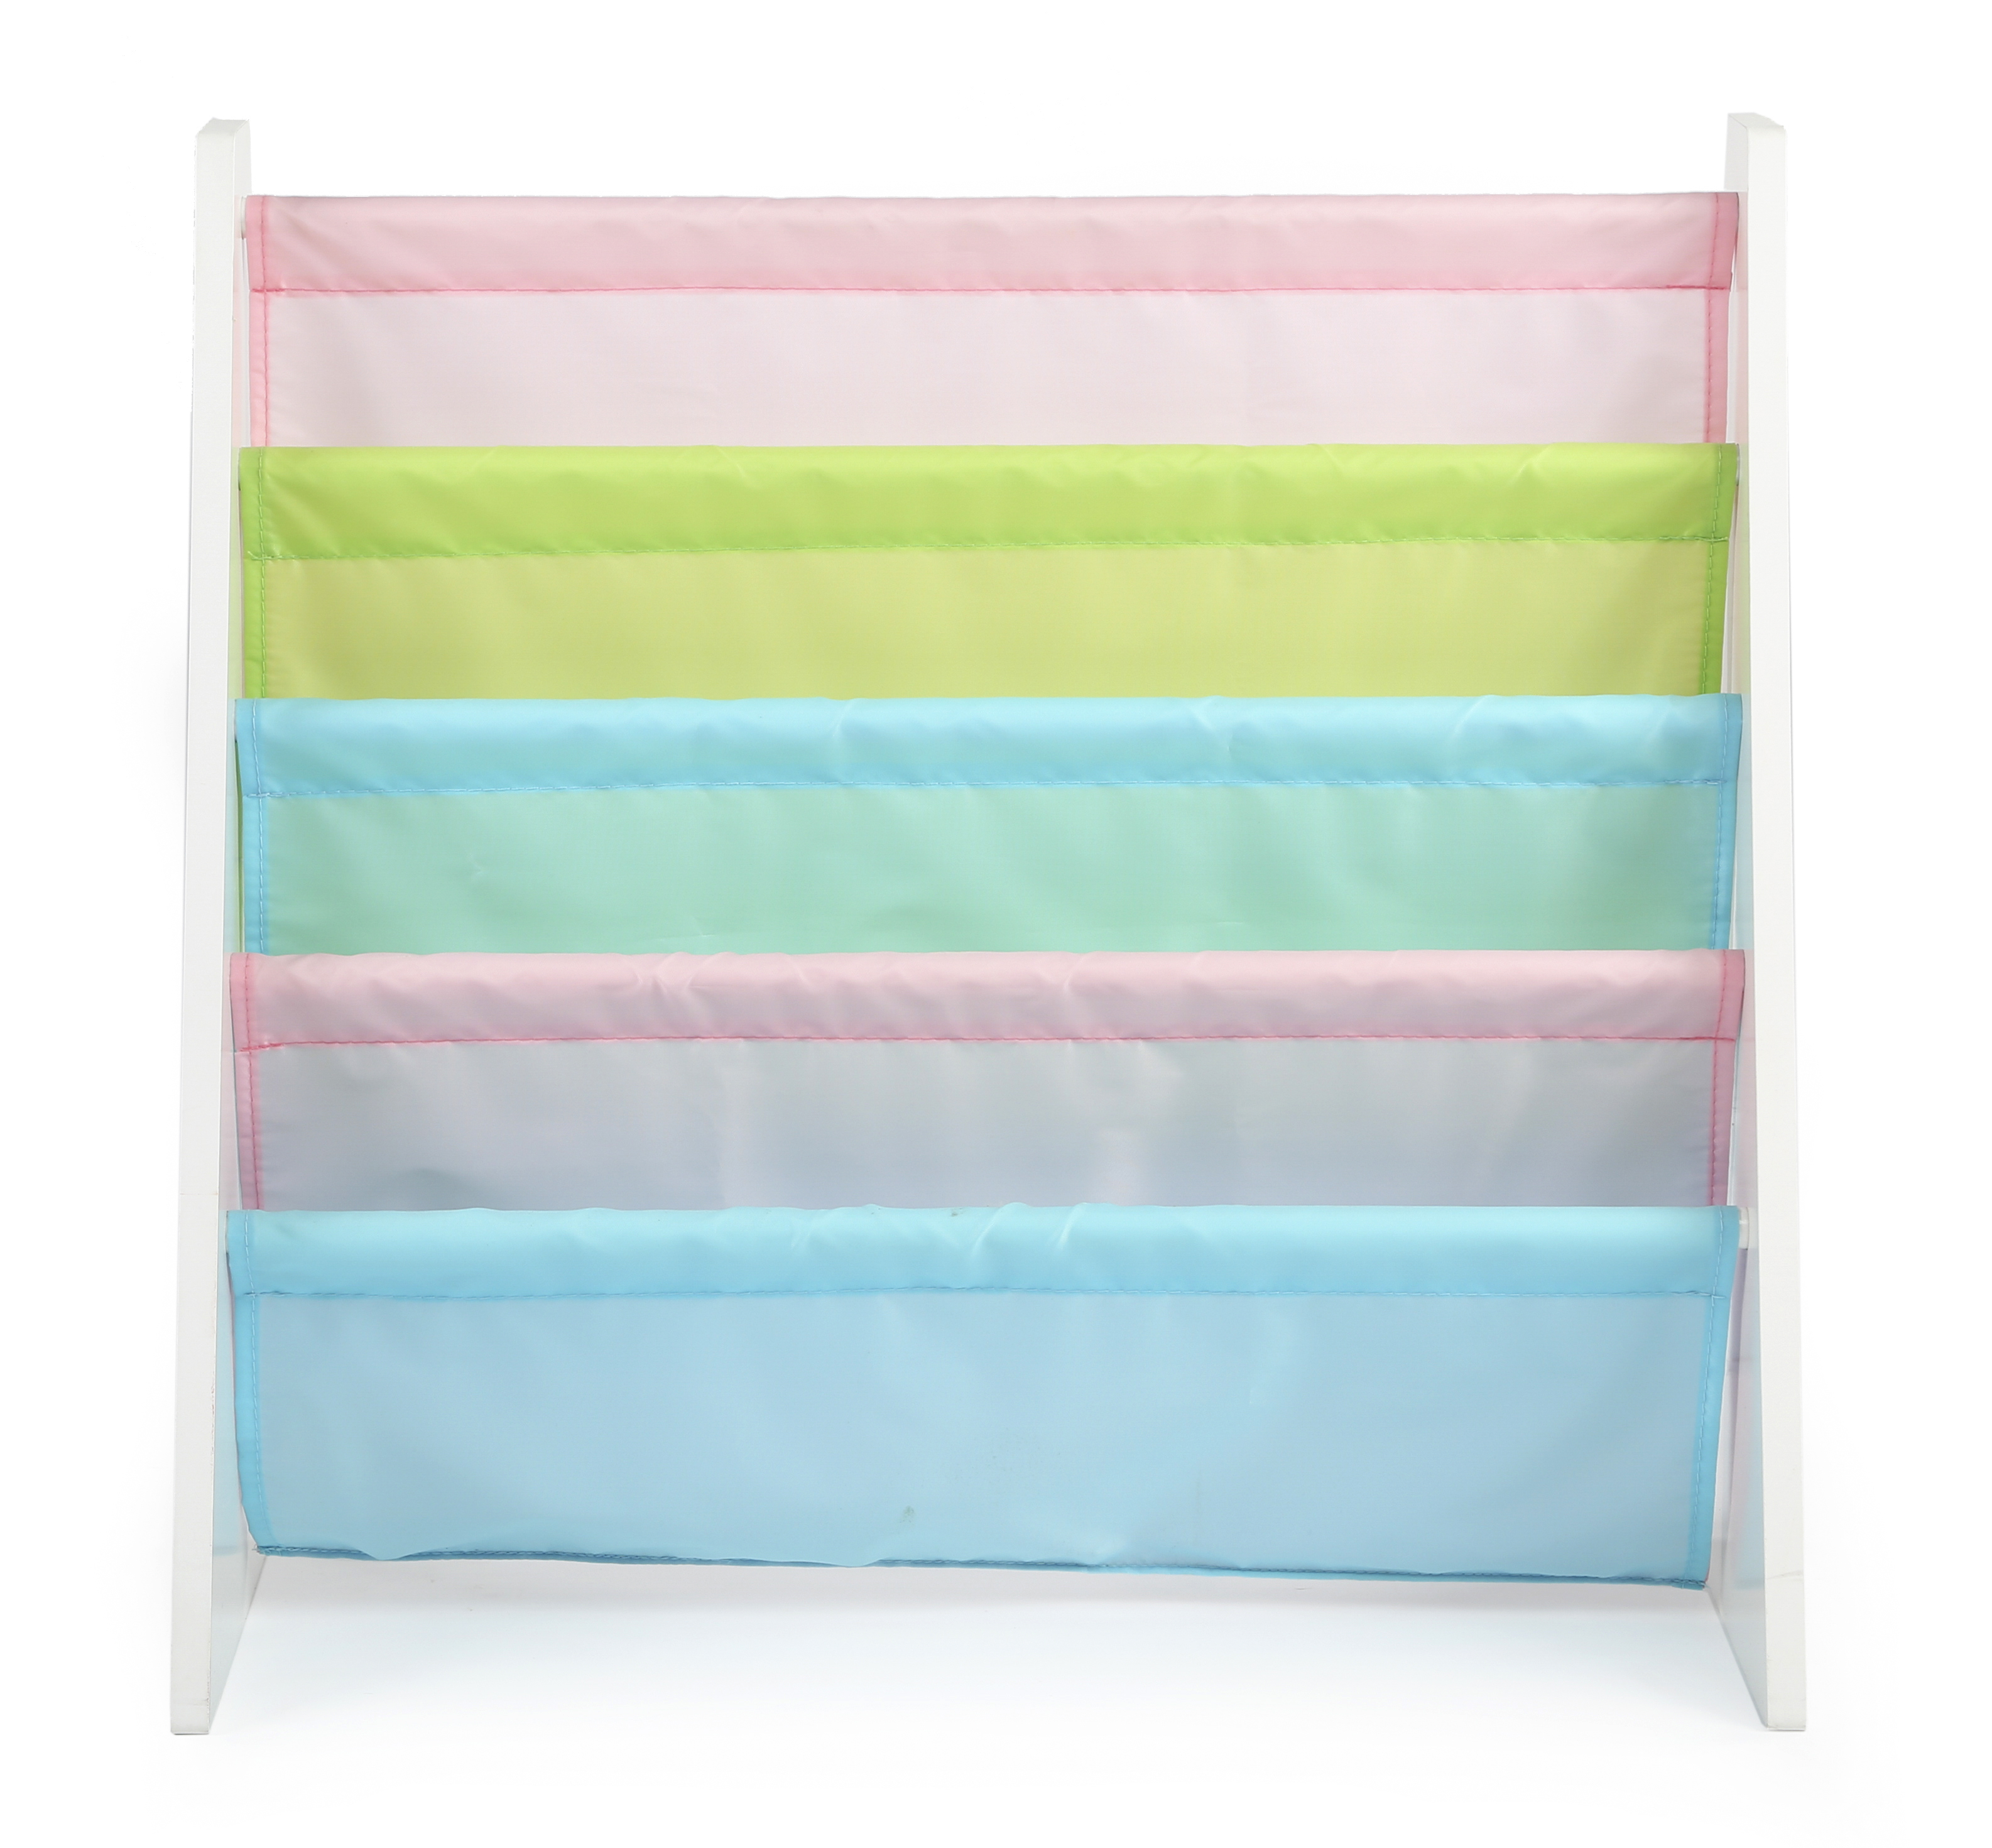 Humble Crew Child Book Rack with Fabric Sling Sleeves, Pastel, 4 Shelves - image 4 of 14